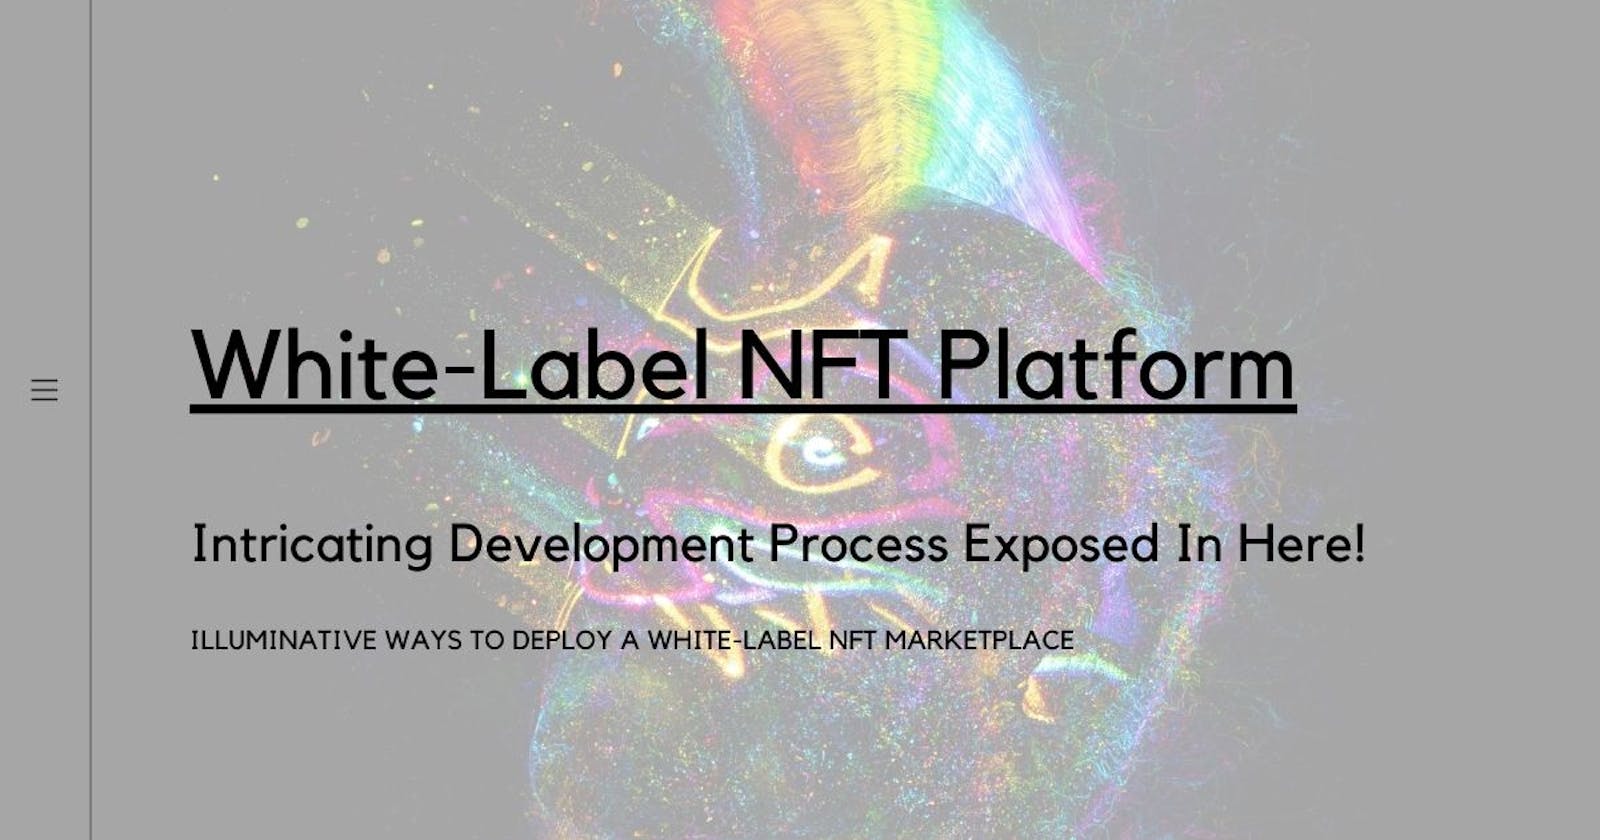 White-label NFT Marketplace Development is wiser choice: Why?